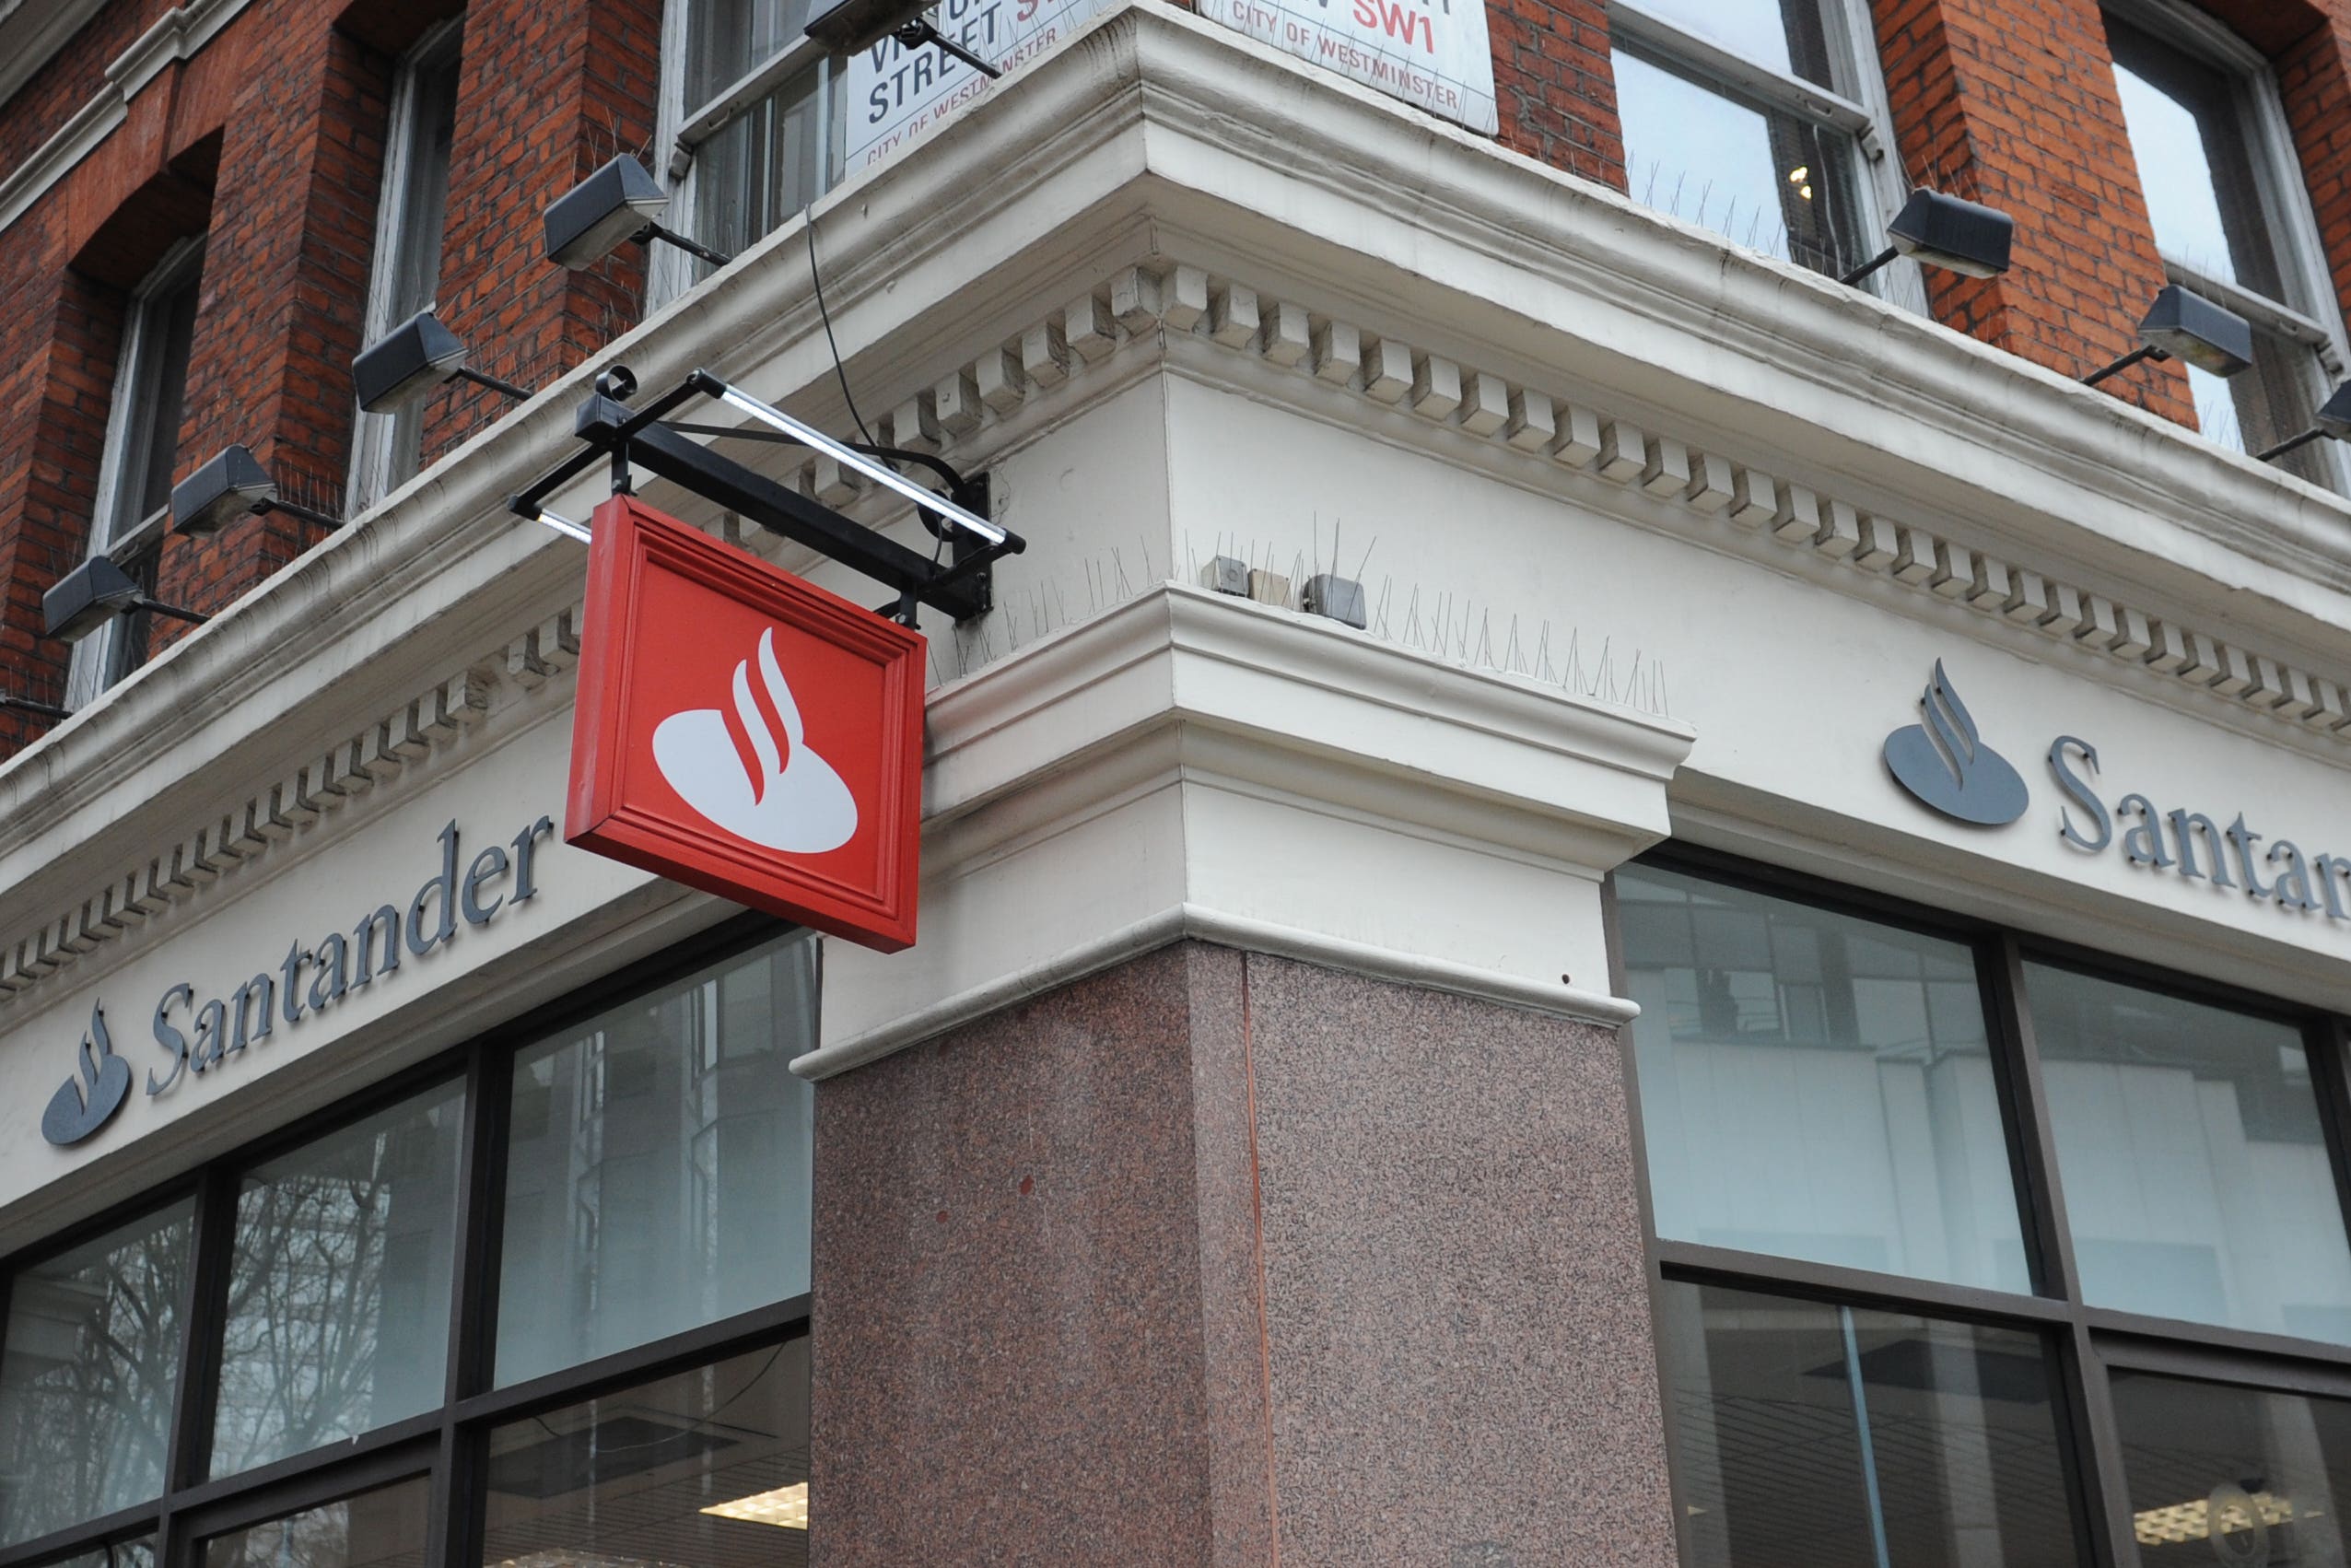 Santander, the first bank to redesign its app so it is more